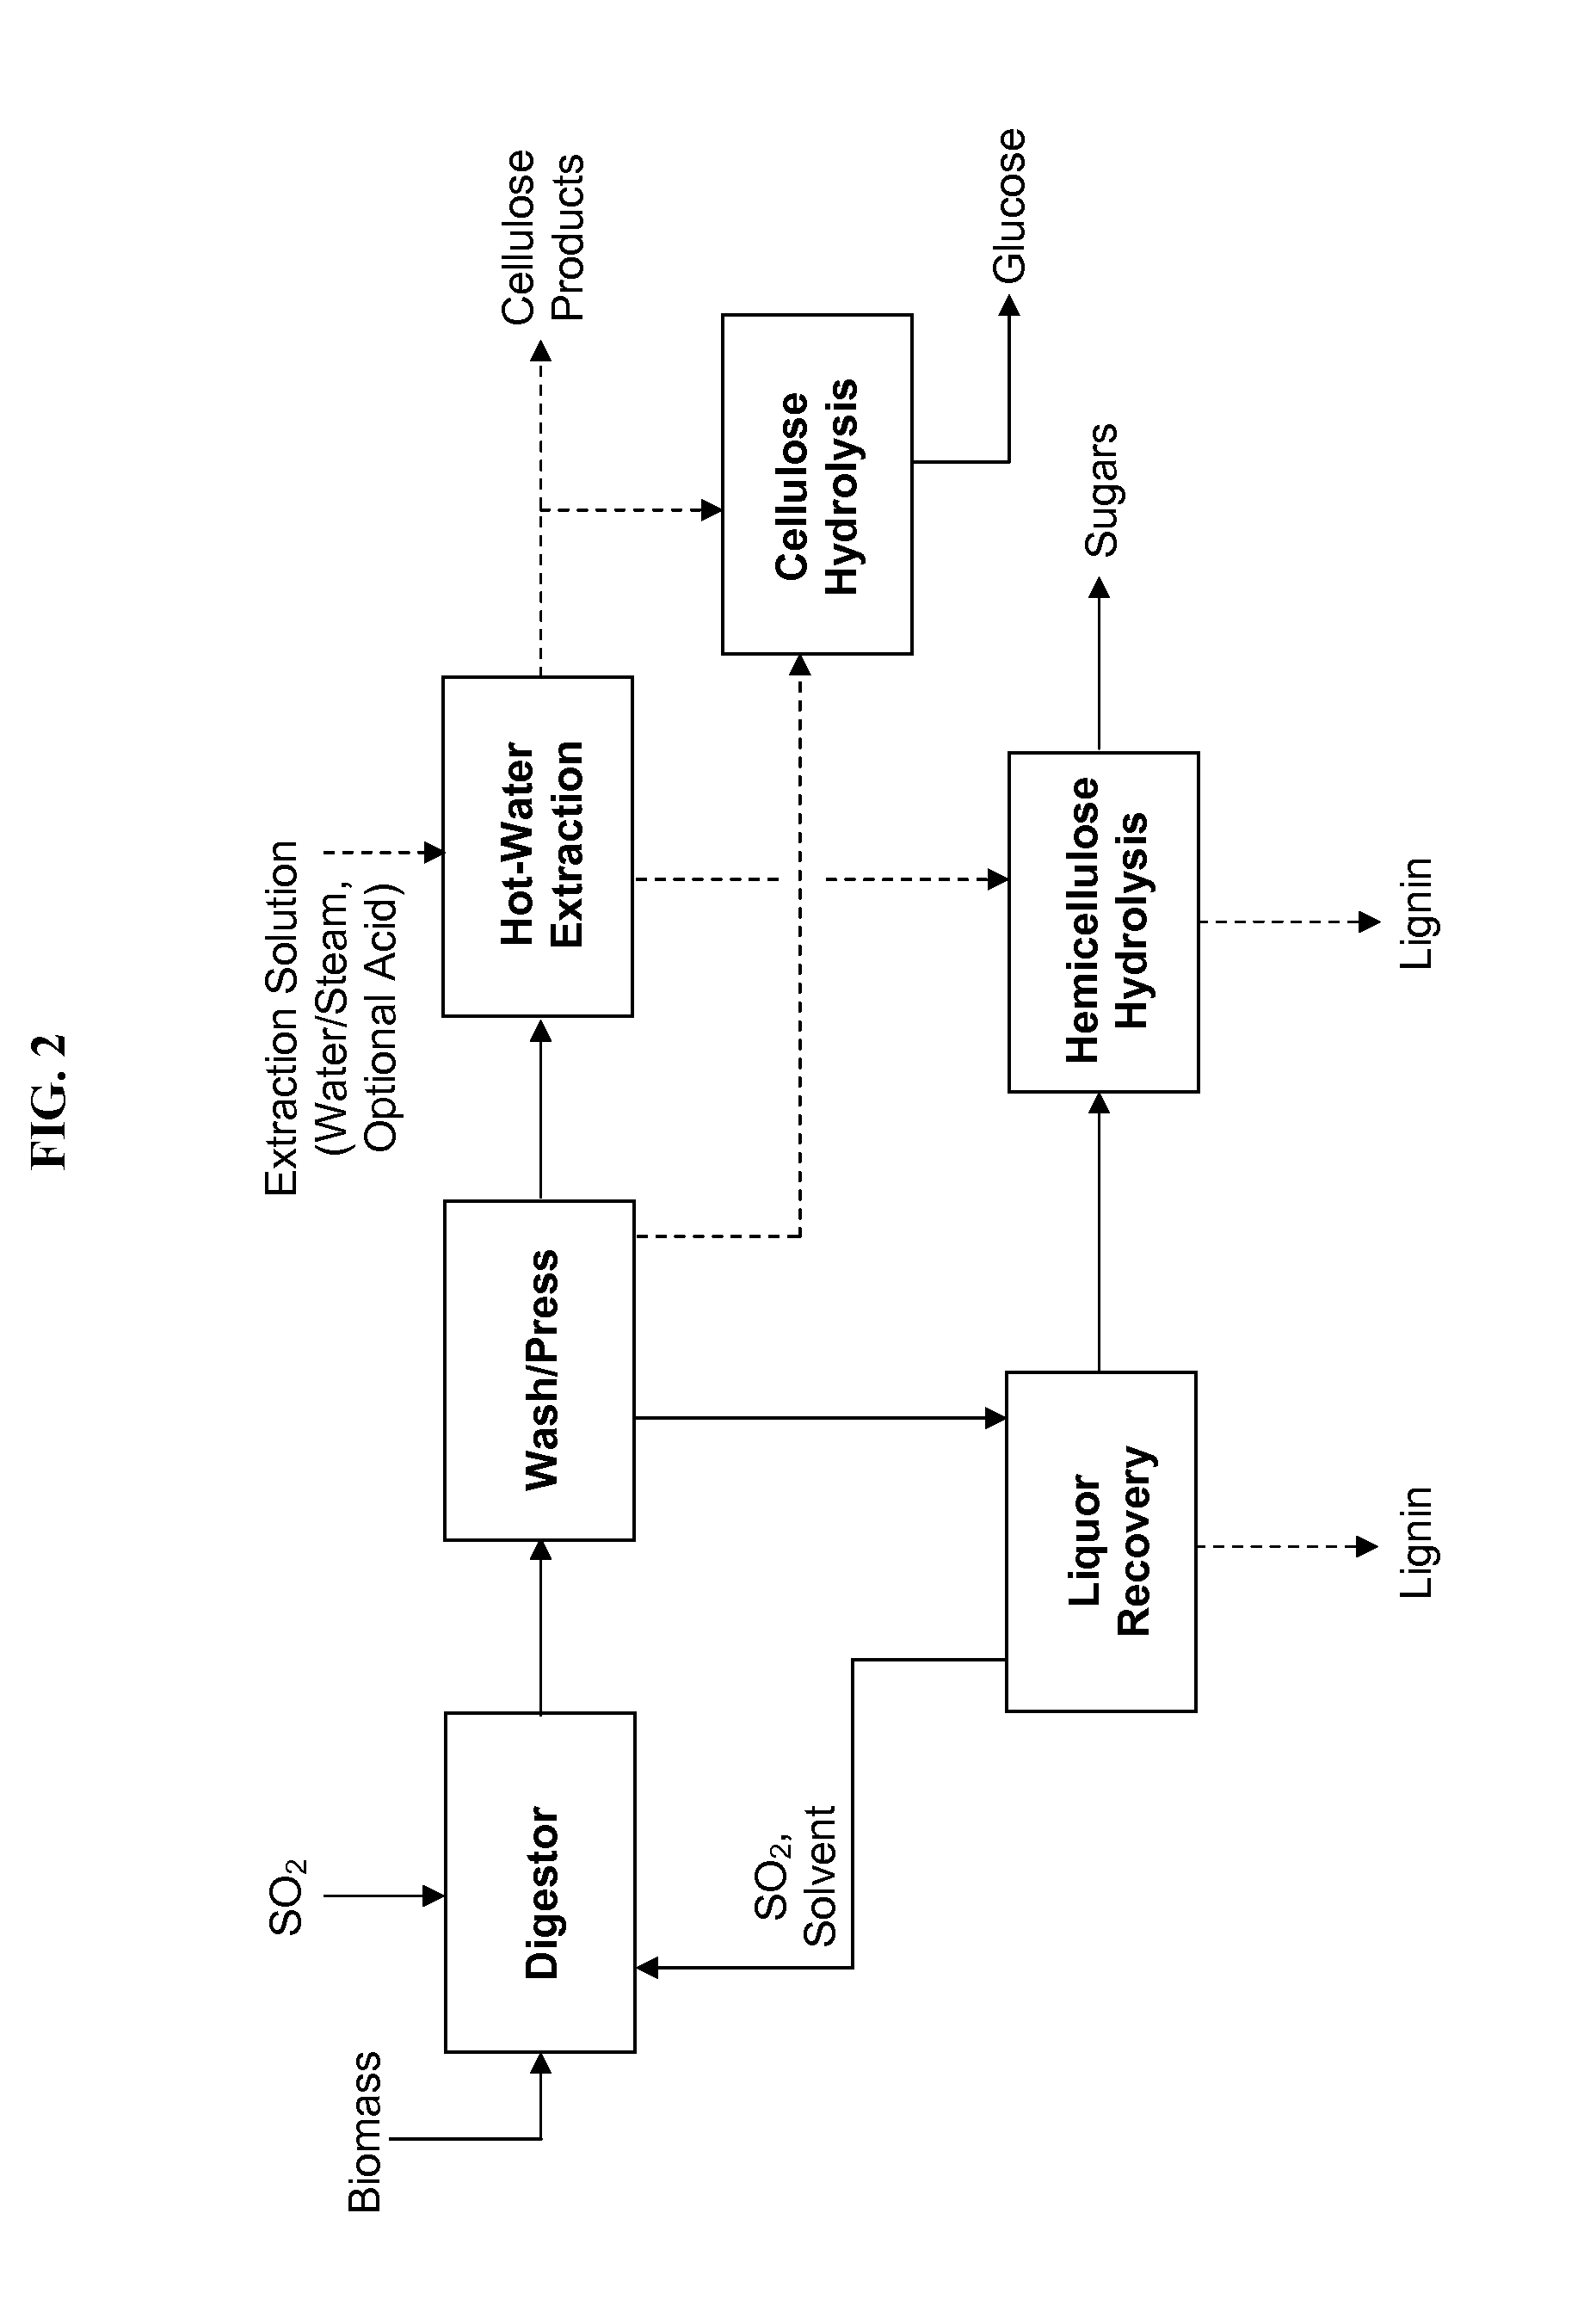 Biomass fractionation processes, apparatus, and products produced therefrom